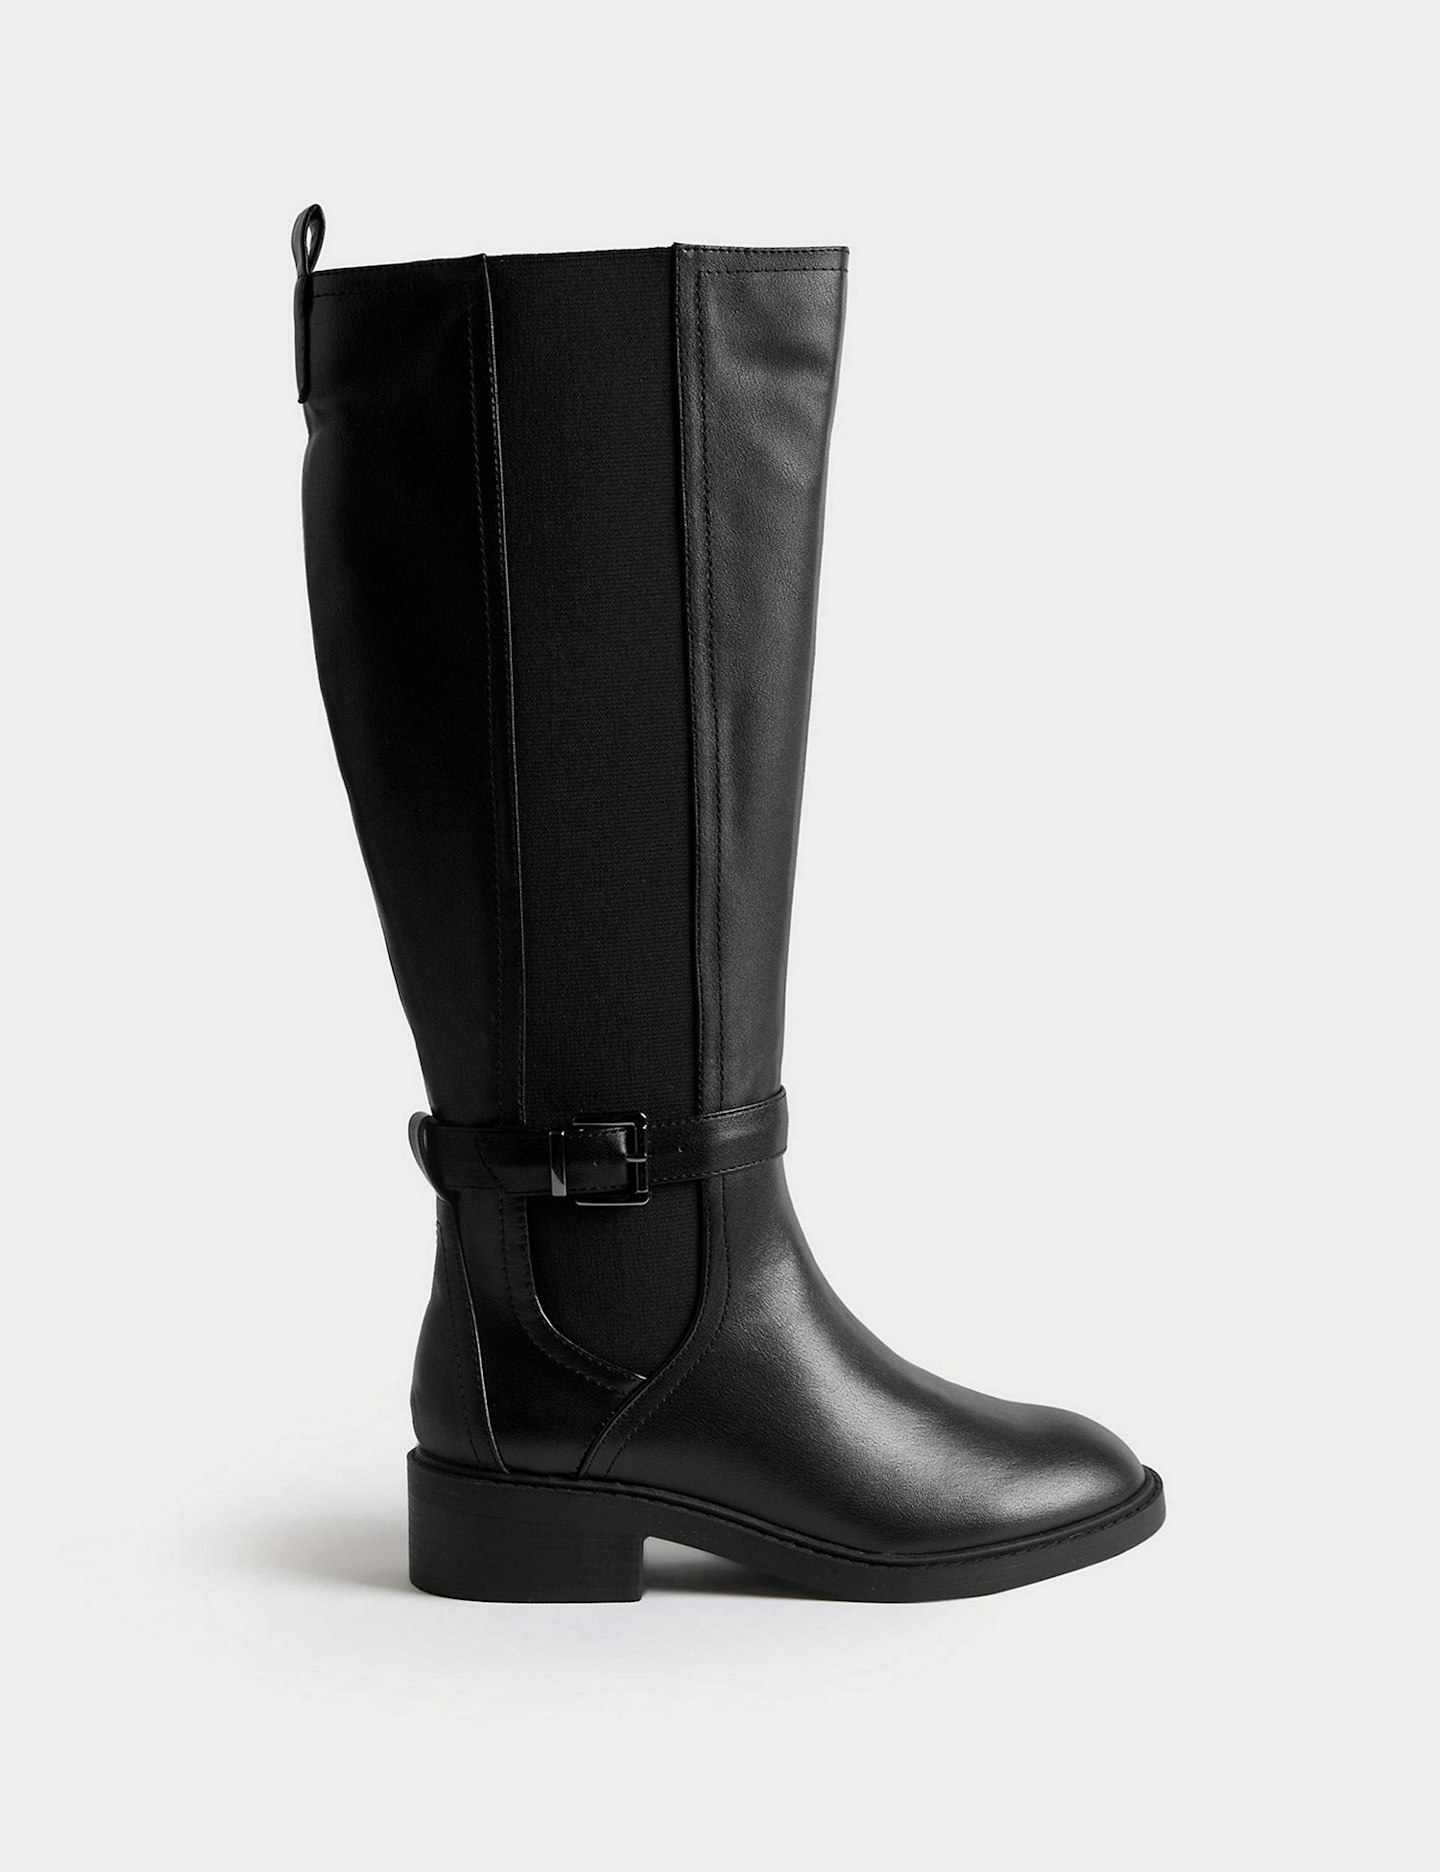 M&S COLLECTION Riding Buckle Flat Knee High Boots